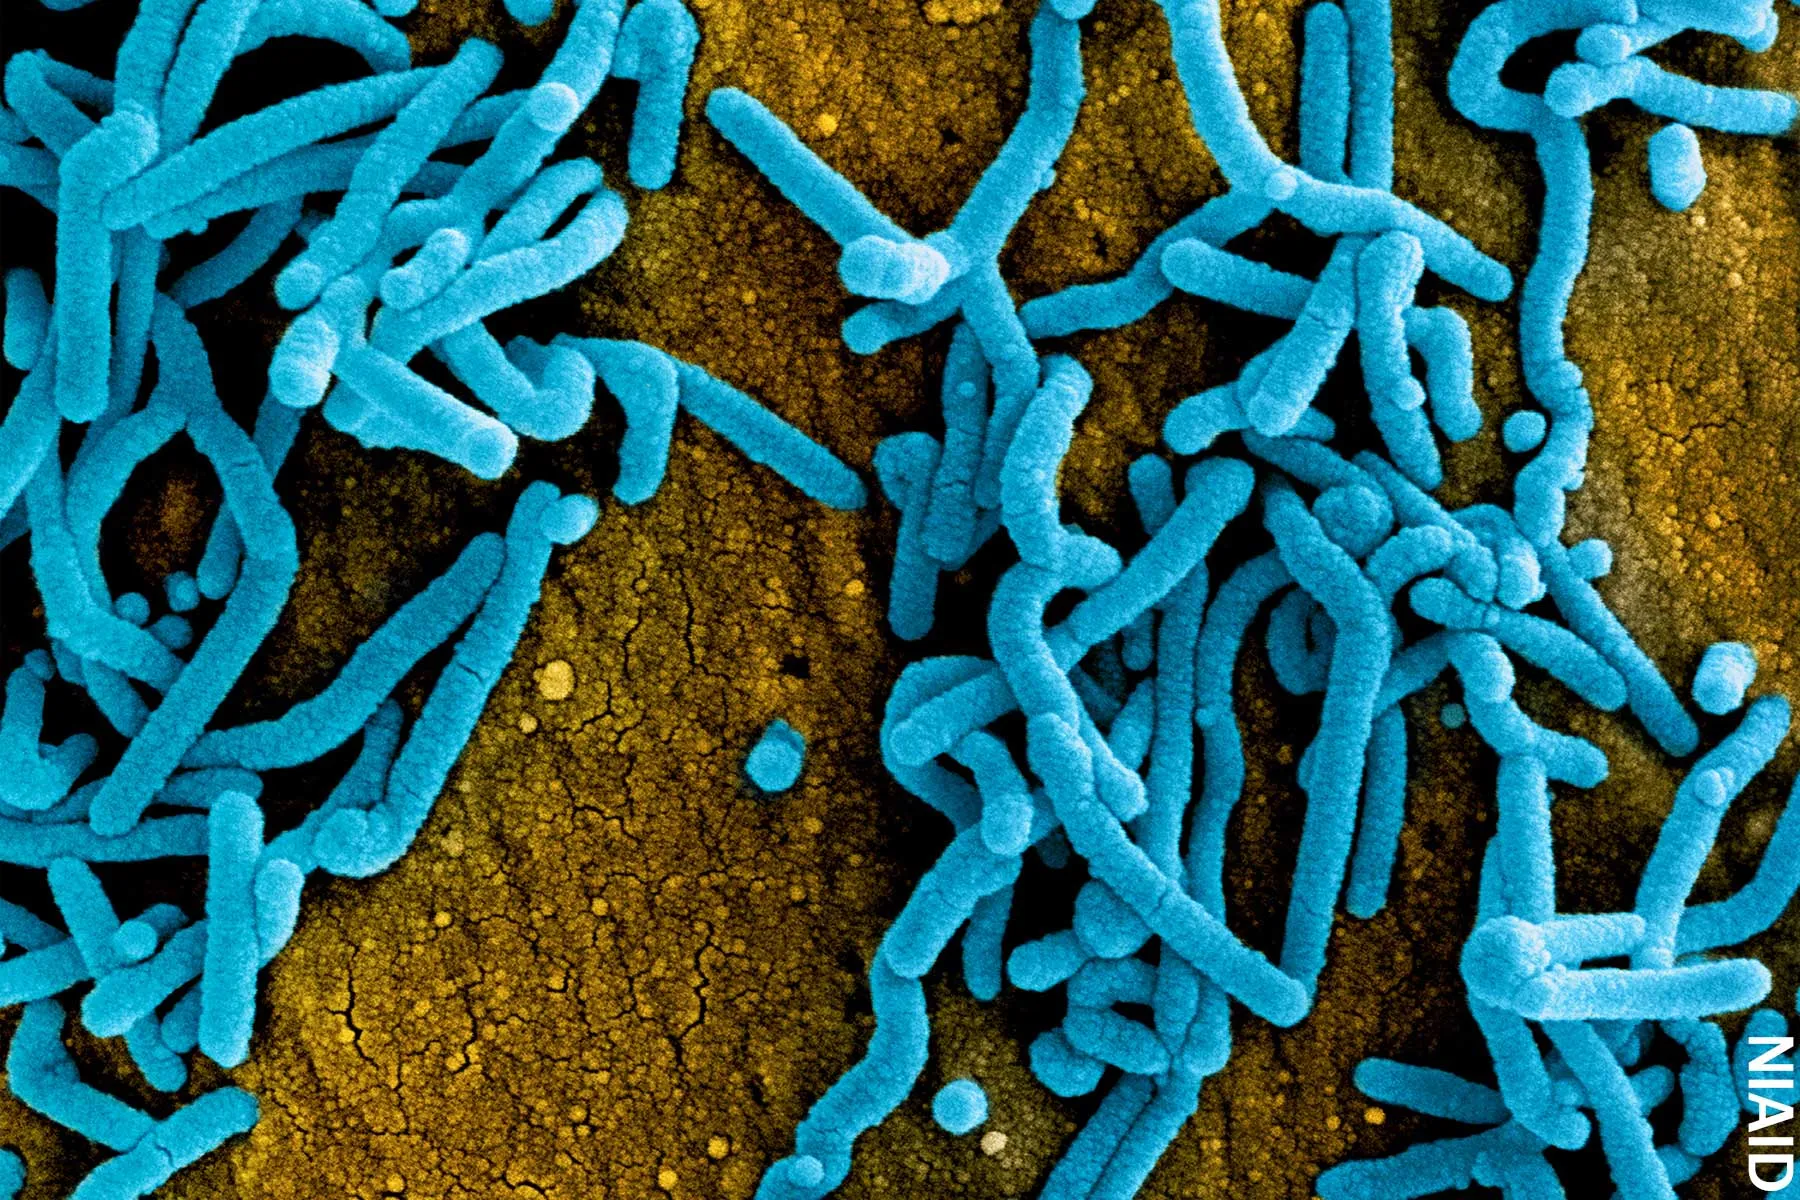 Death Reported From Ebola-Like Marburg Virus in West Africa